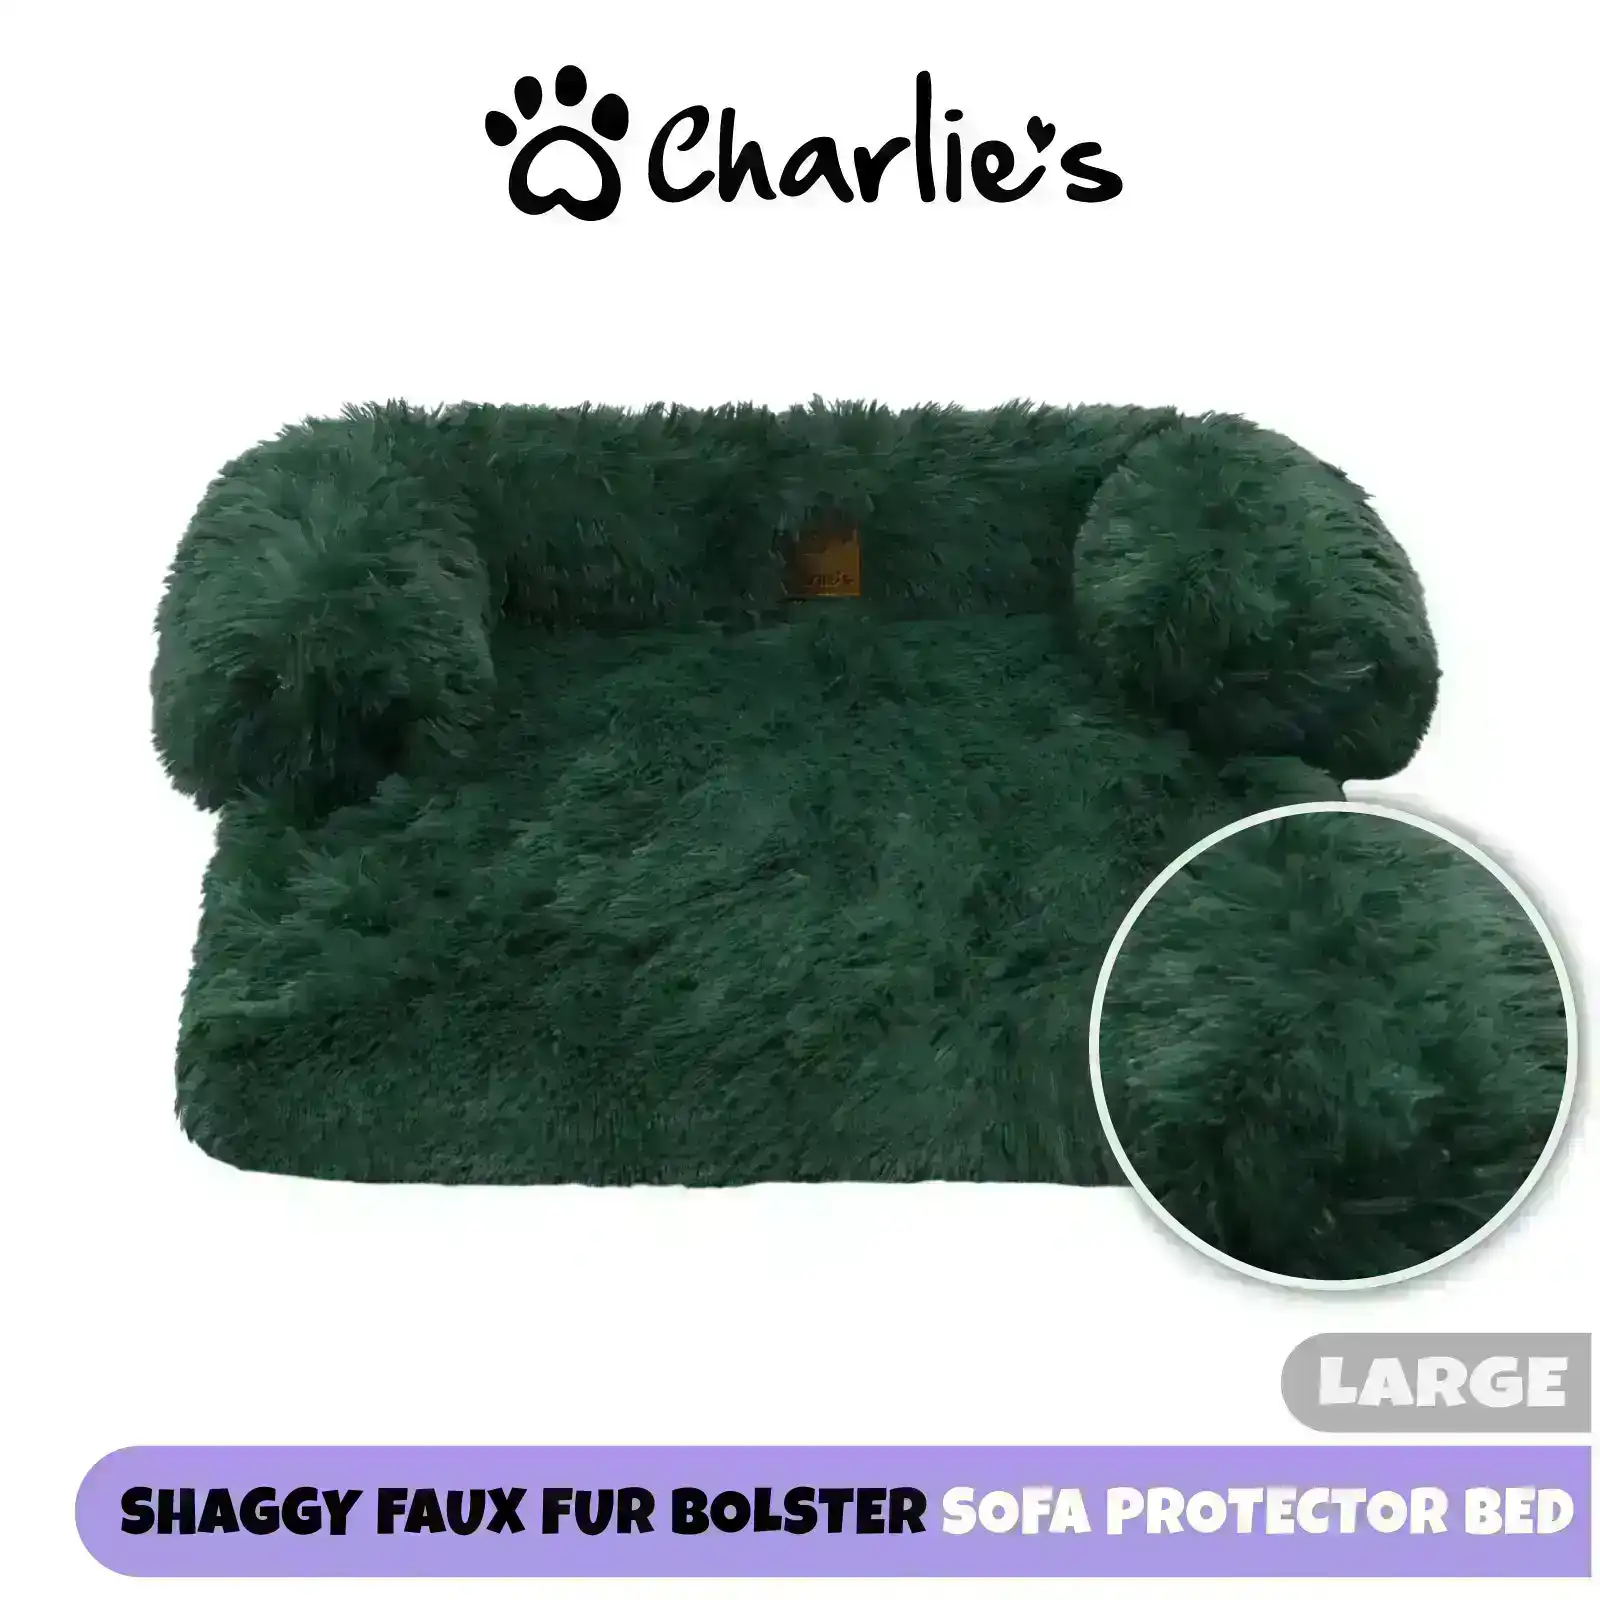 Charlie's Shaggy Faux Fur Bolster Sofa Protector Calming Dog Bed Eden Green Large